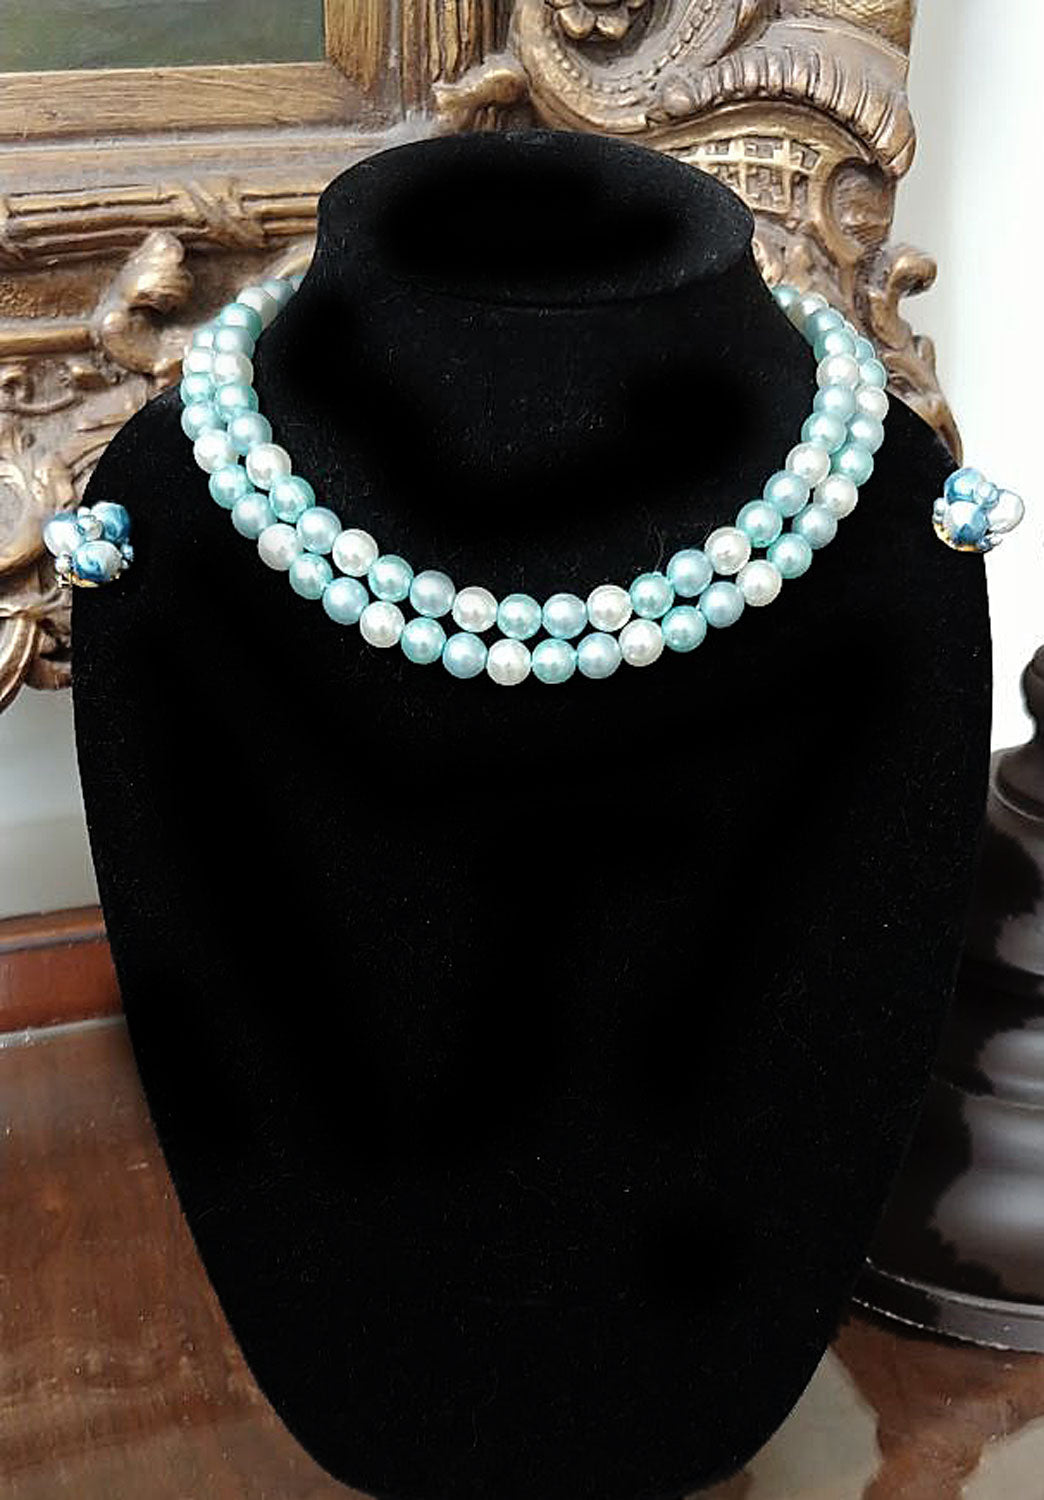 Aqua Blue Two Strand Faux Pearls Necklace